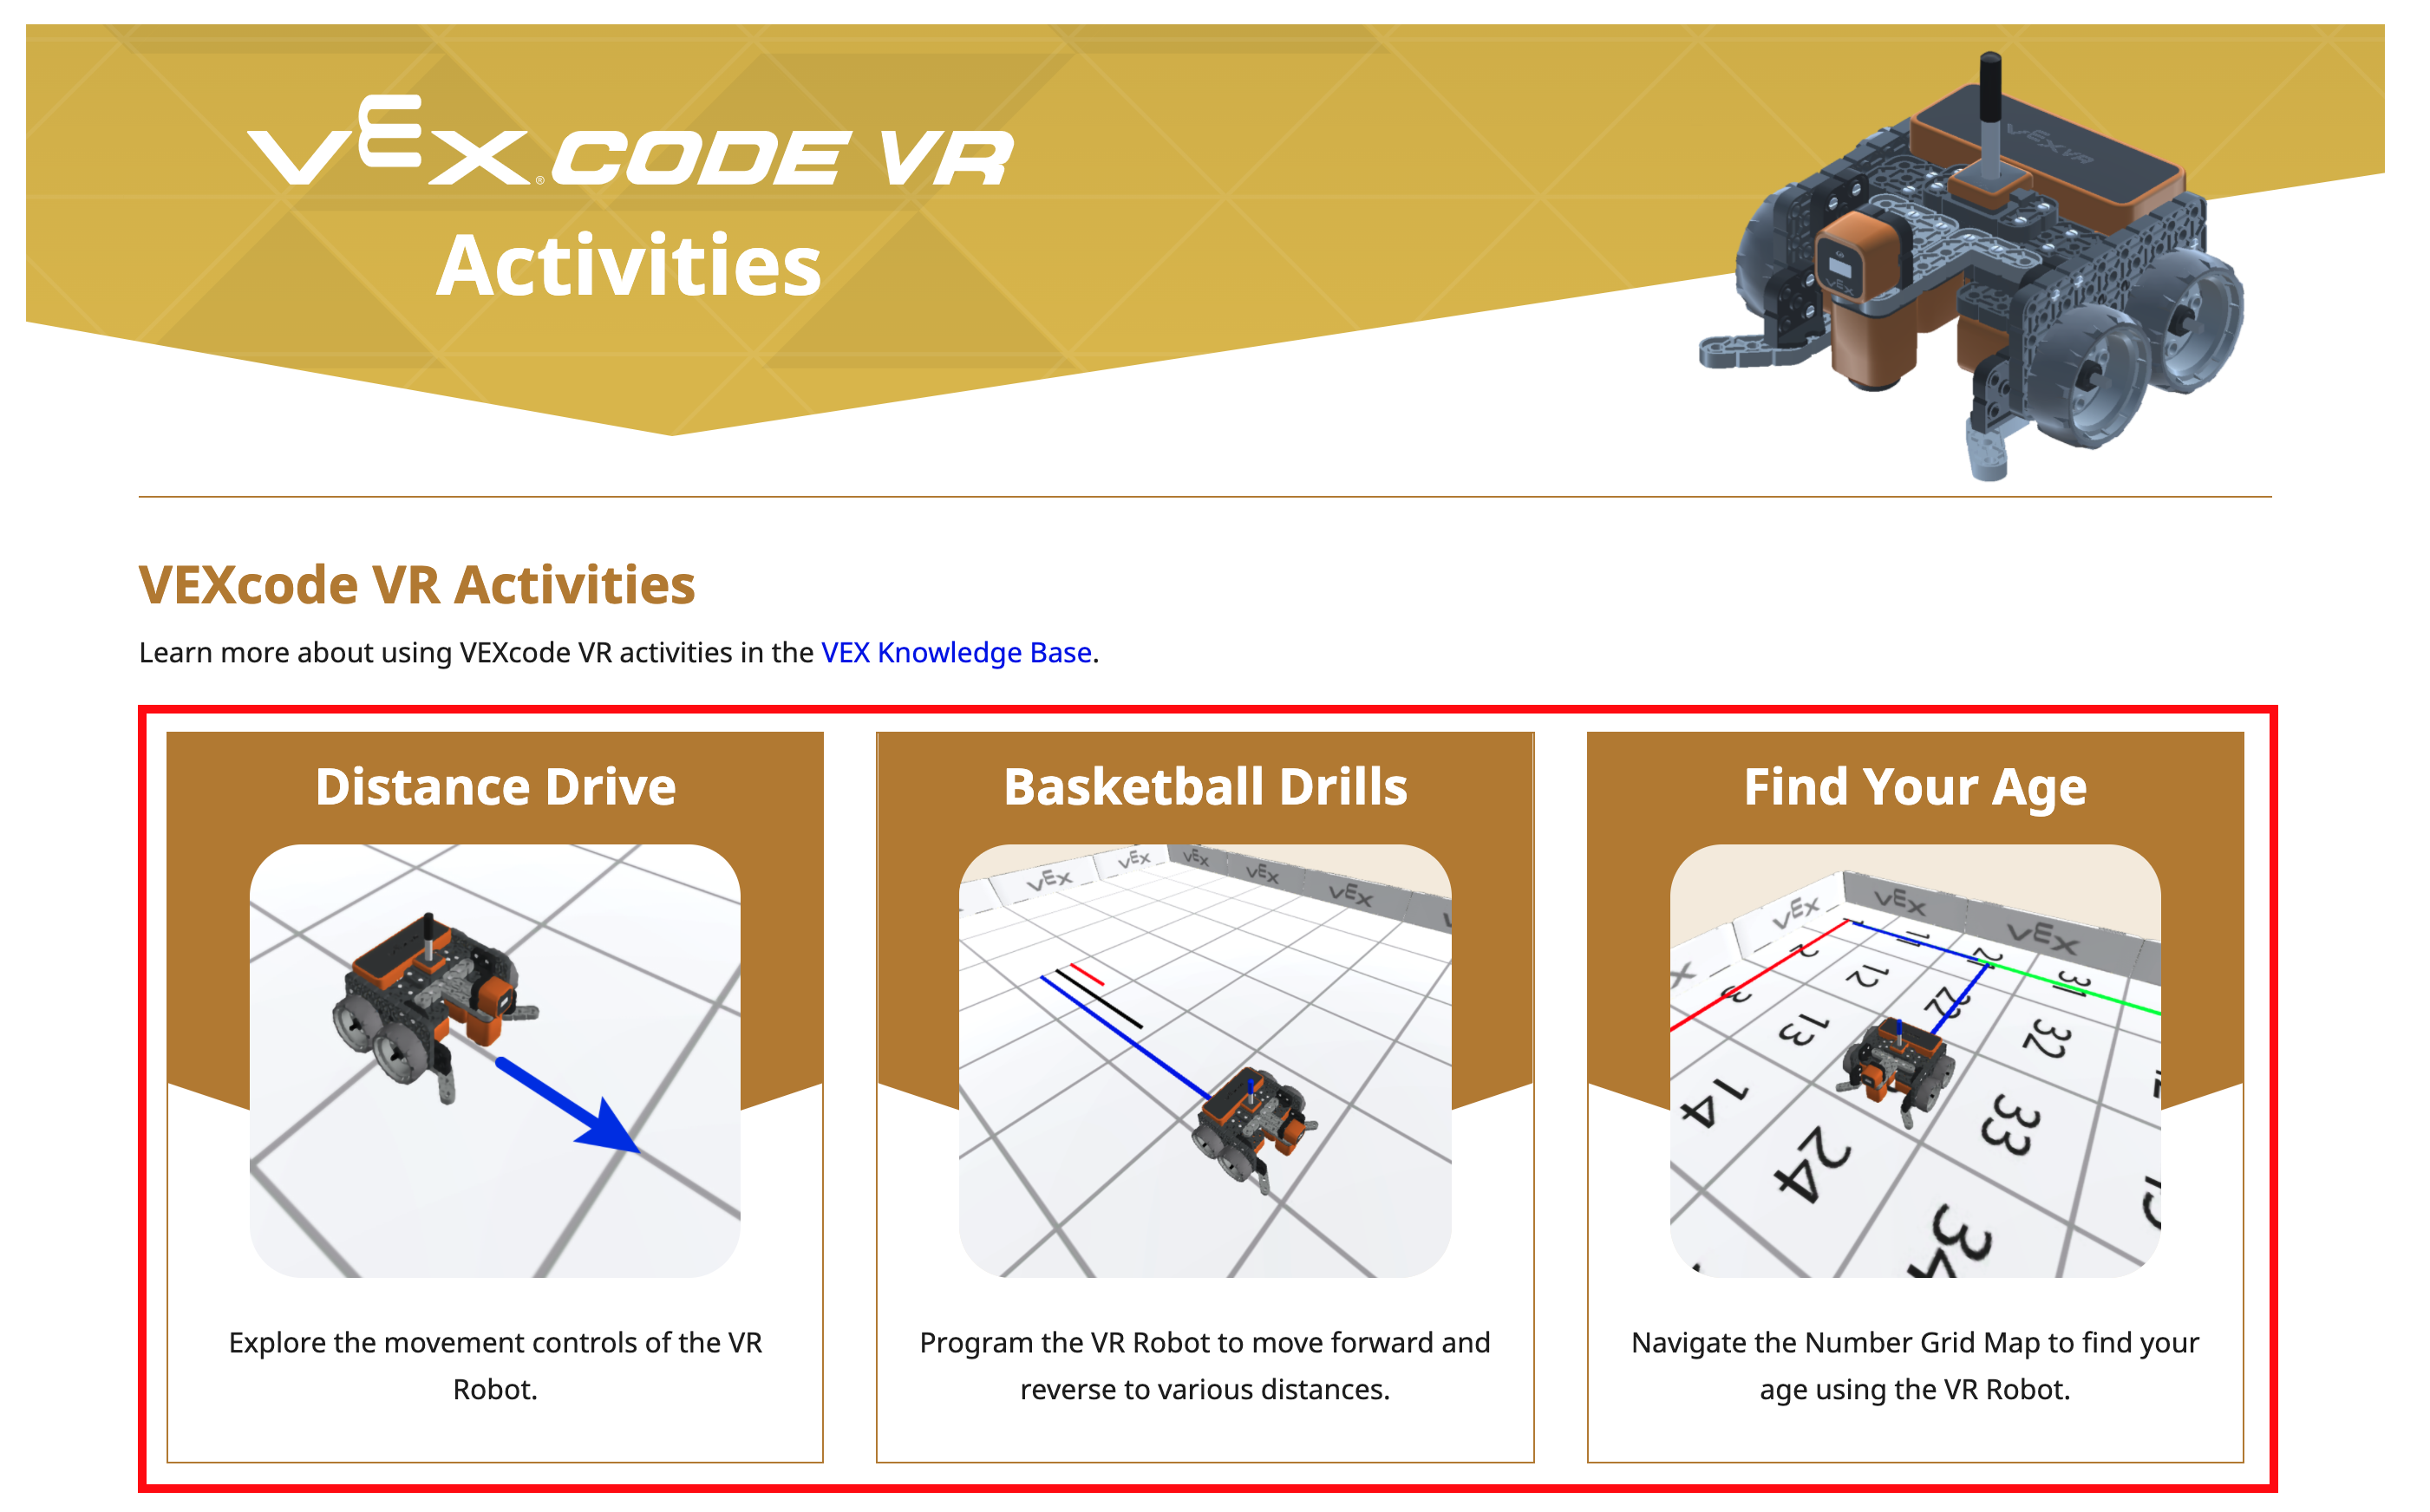 Select a VR activity